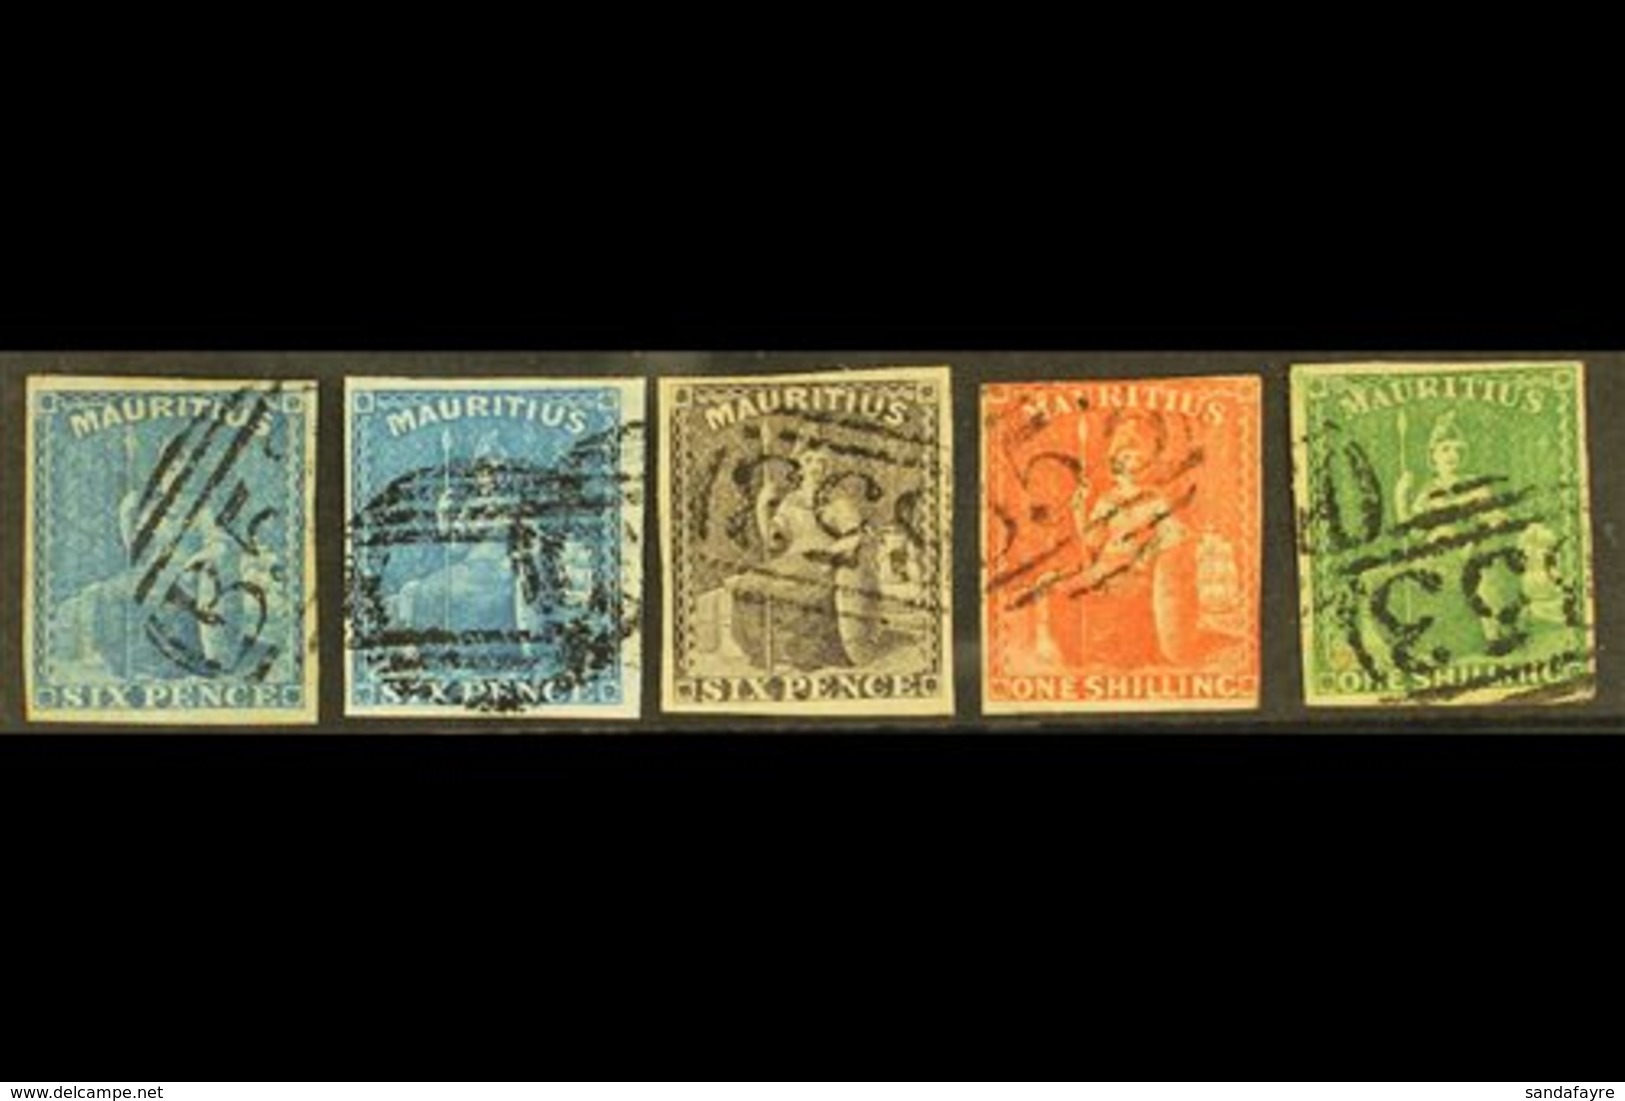 1859-61 BRITANNIAS All Values Incl. Two Shades Of 6d Blue, Imperf, SG 32/5, Good To Fine Used, 1s Vermilion With Close / - Mauritius (...-1967)